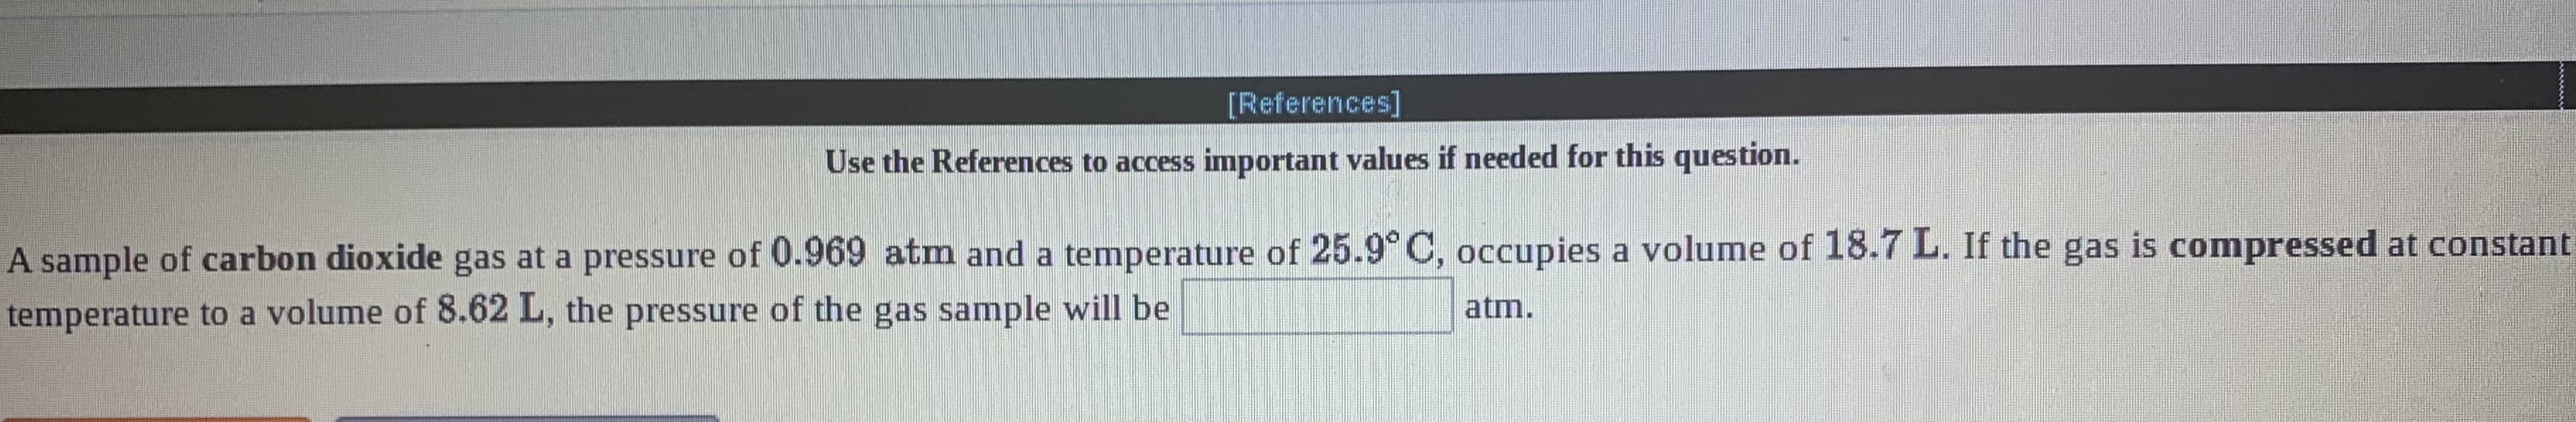 [References]
Use the References to access important values if needed for this question.
A sample of carbon dioxide gas at a pressure of 0.969 atm and a temperature of 25.9° C, occupies a volume of 18.7 L. If the gas is compressed at constant
temperature to a volume of 8.62 L, the pressure of the gas sample will be
atm.
